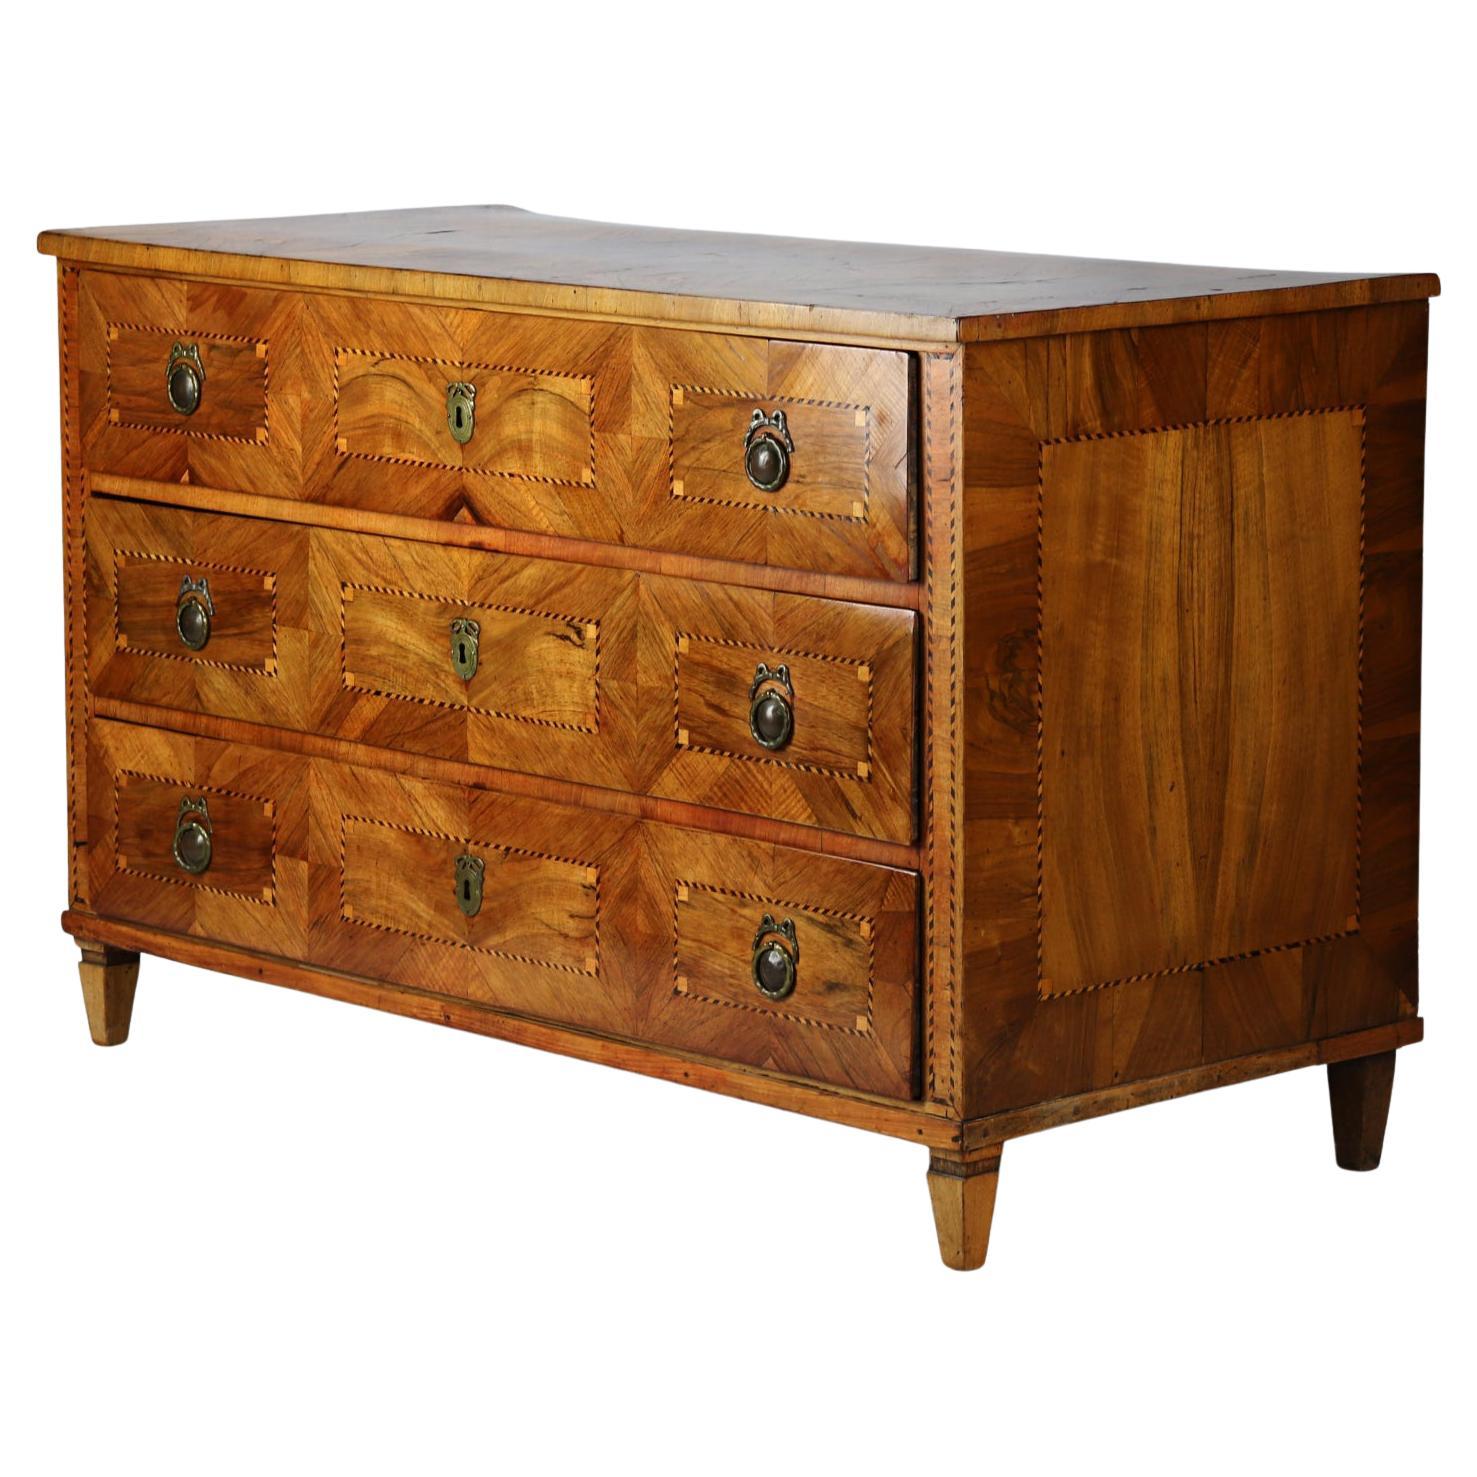 Neoclassical Walnut Chest of Drawers, Commode Early 19th Century